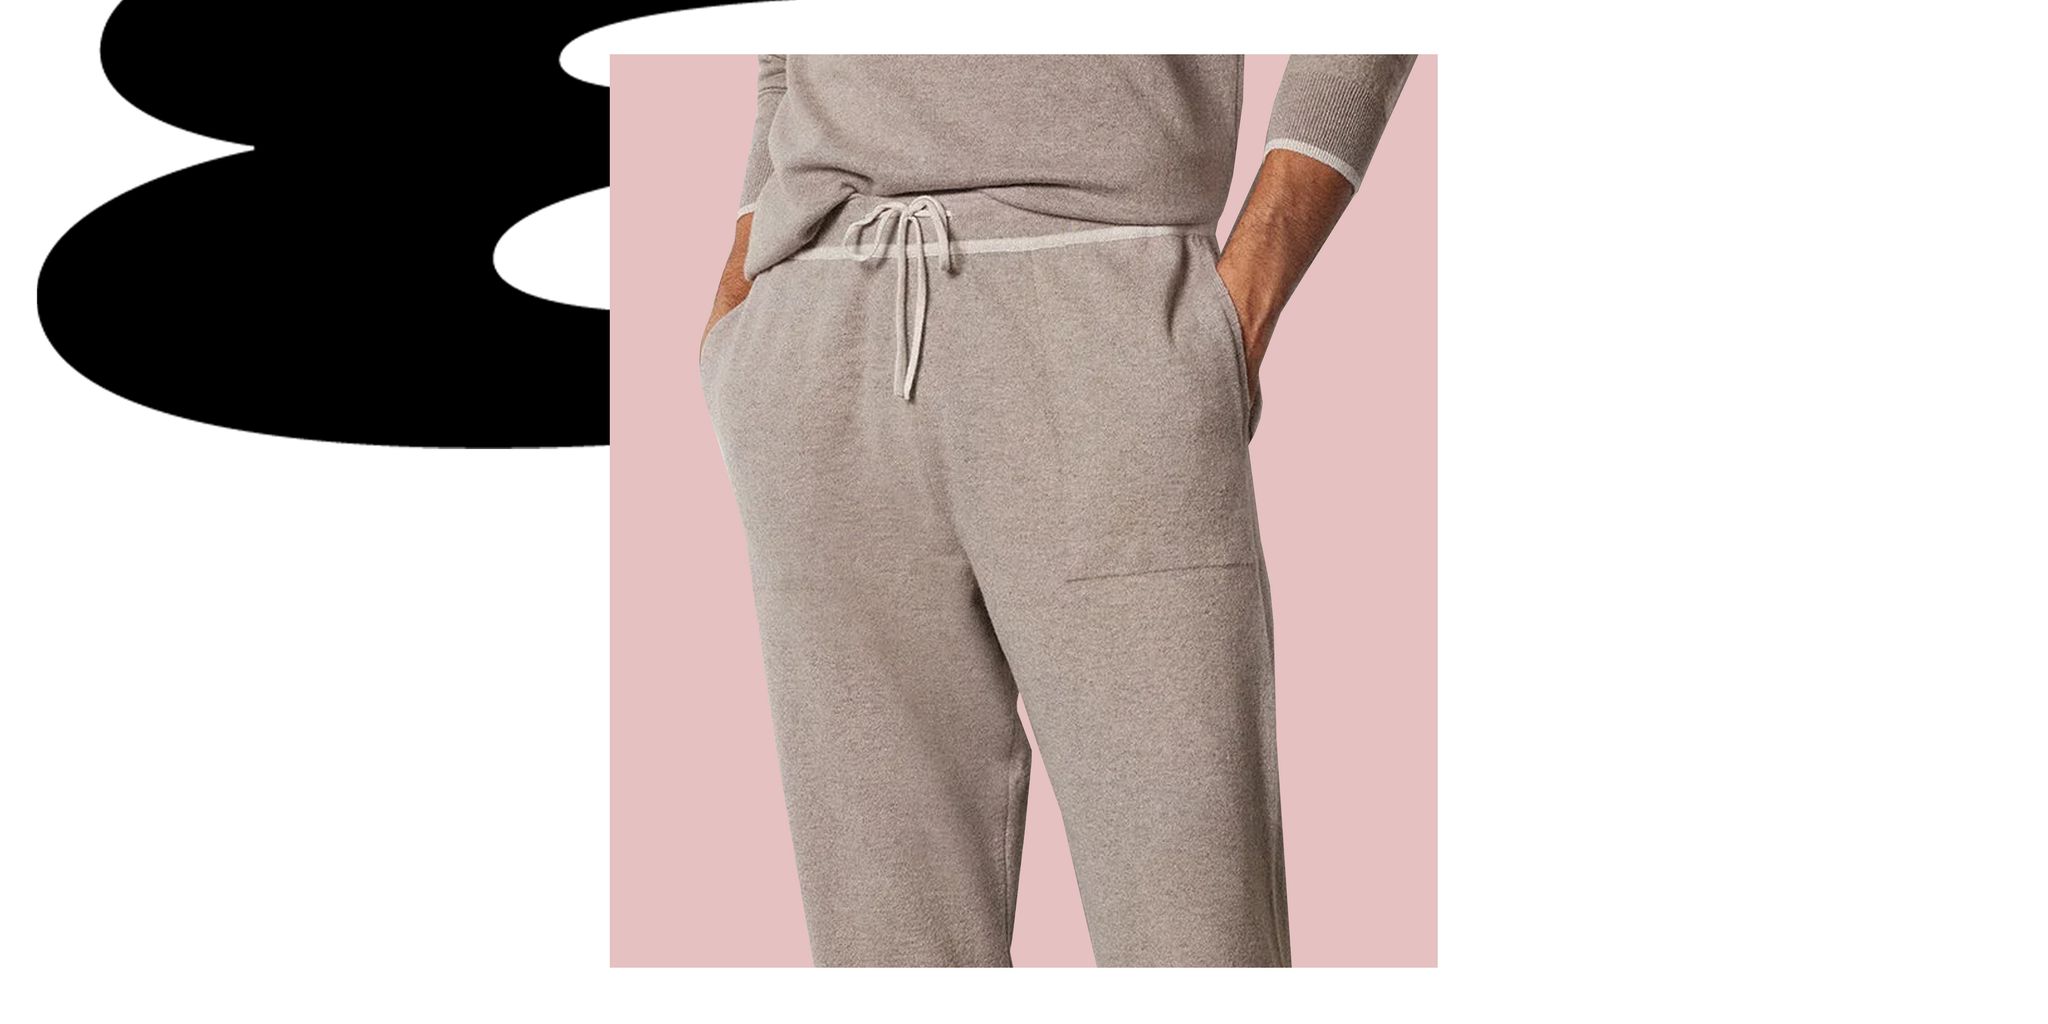 Hanes Women's Luxe Collection Lightweight Fleece Sweatpant with